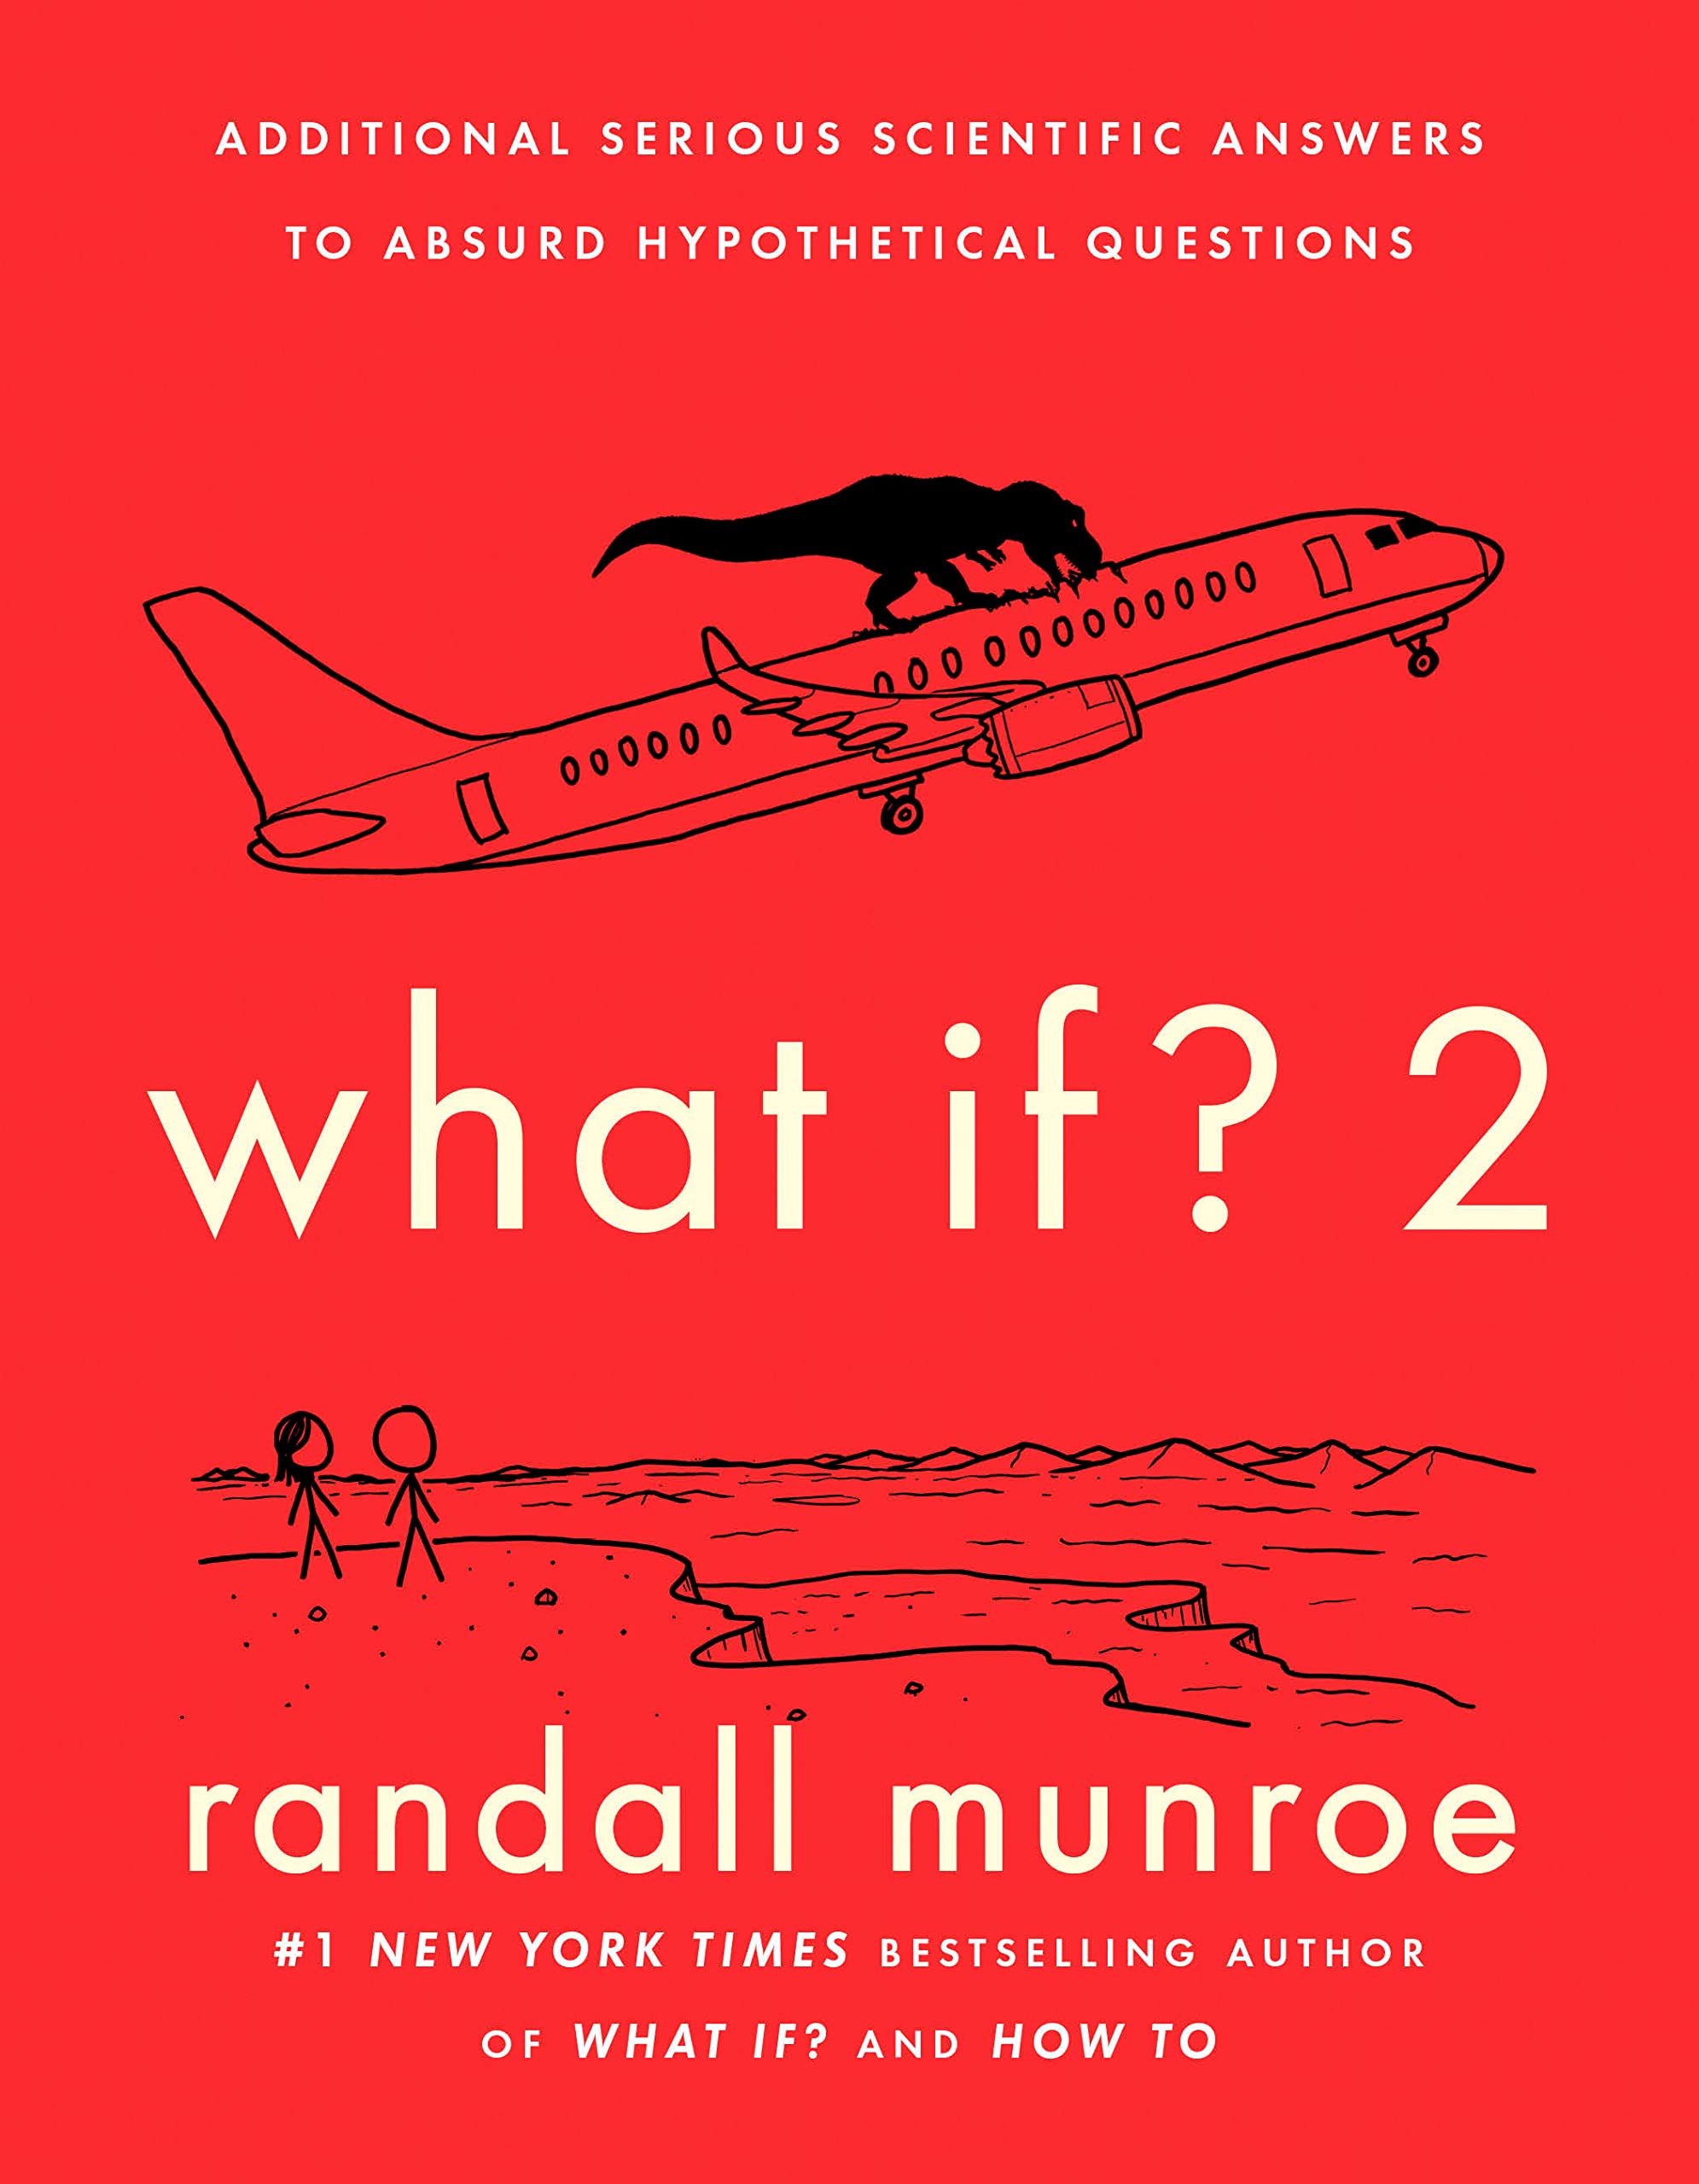 What If? #2 by Randall Munroe Free Download